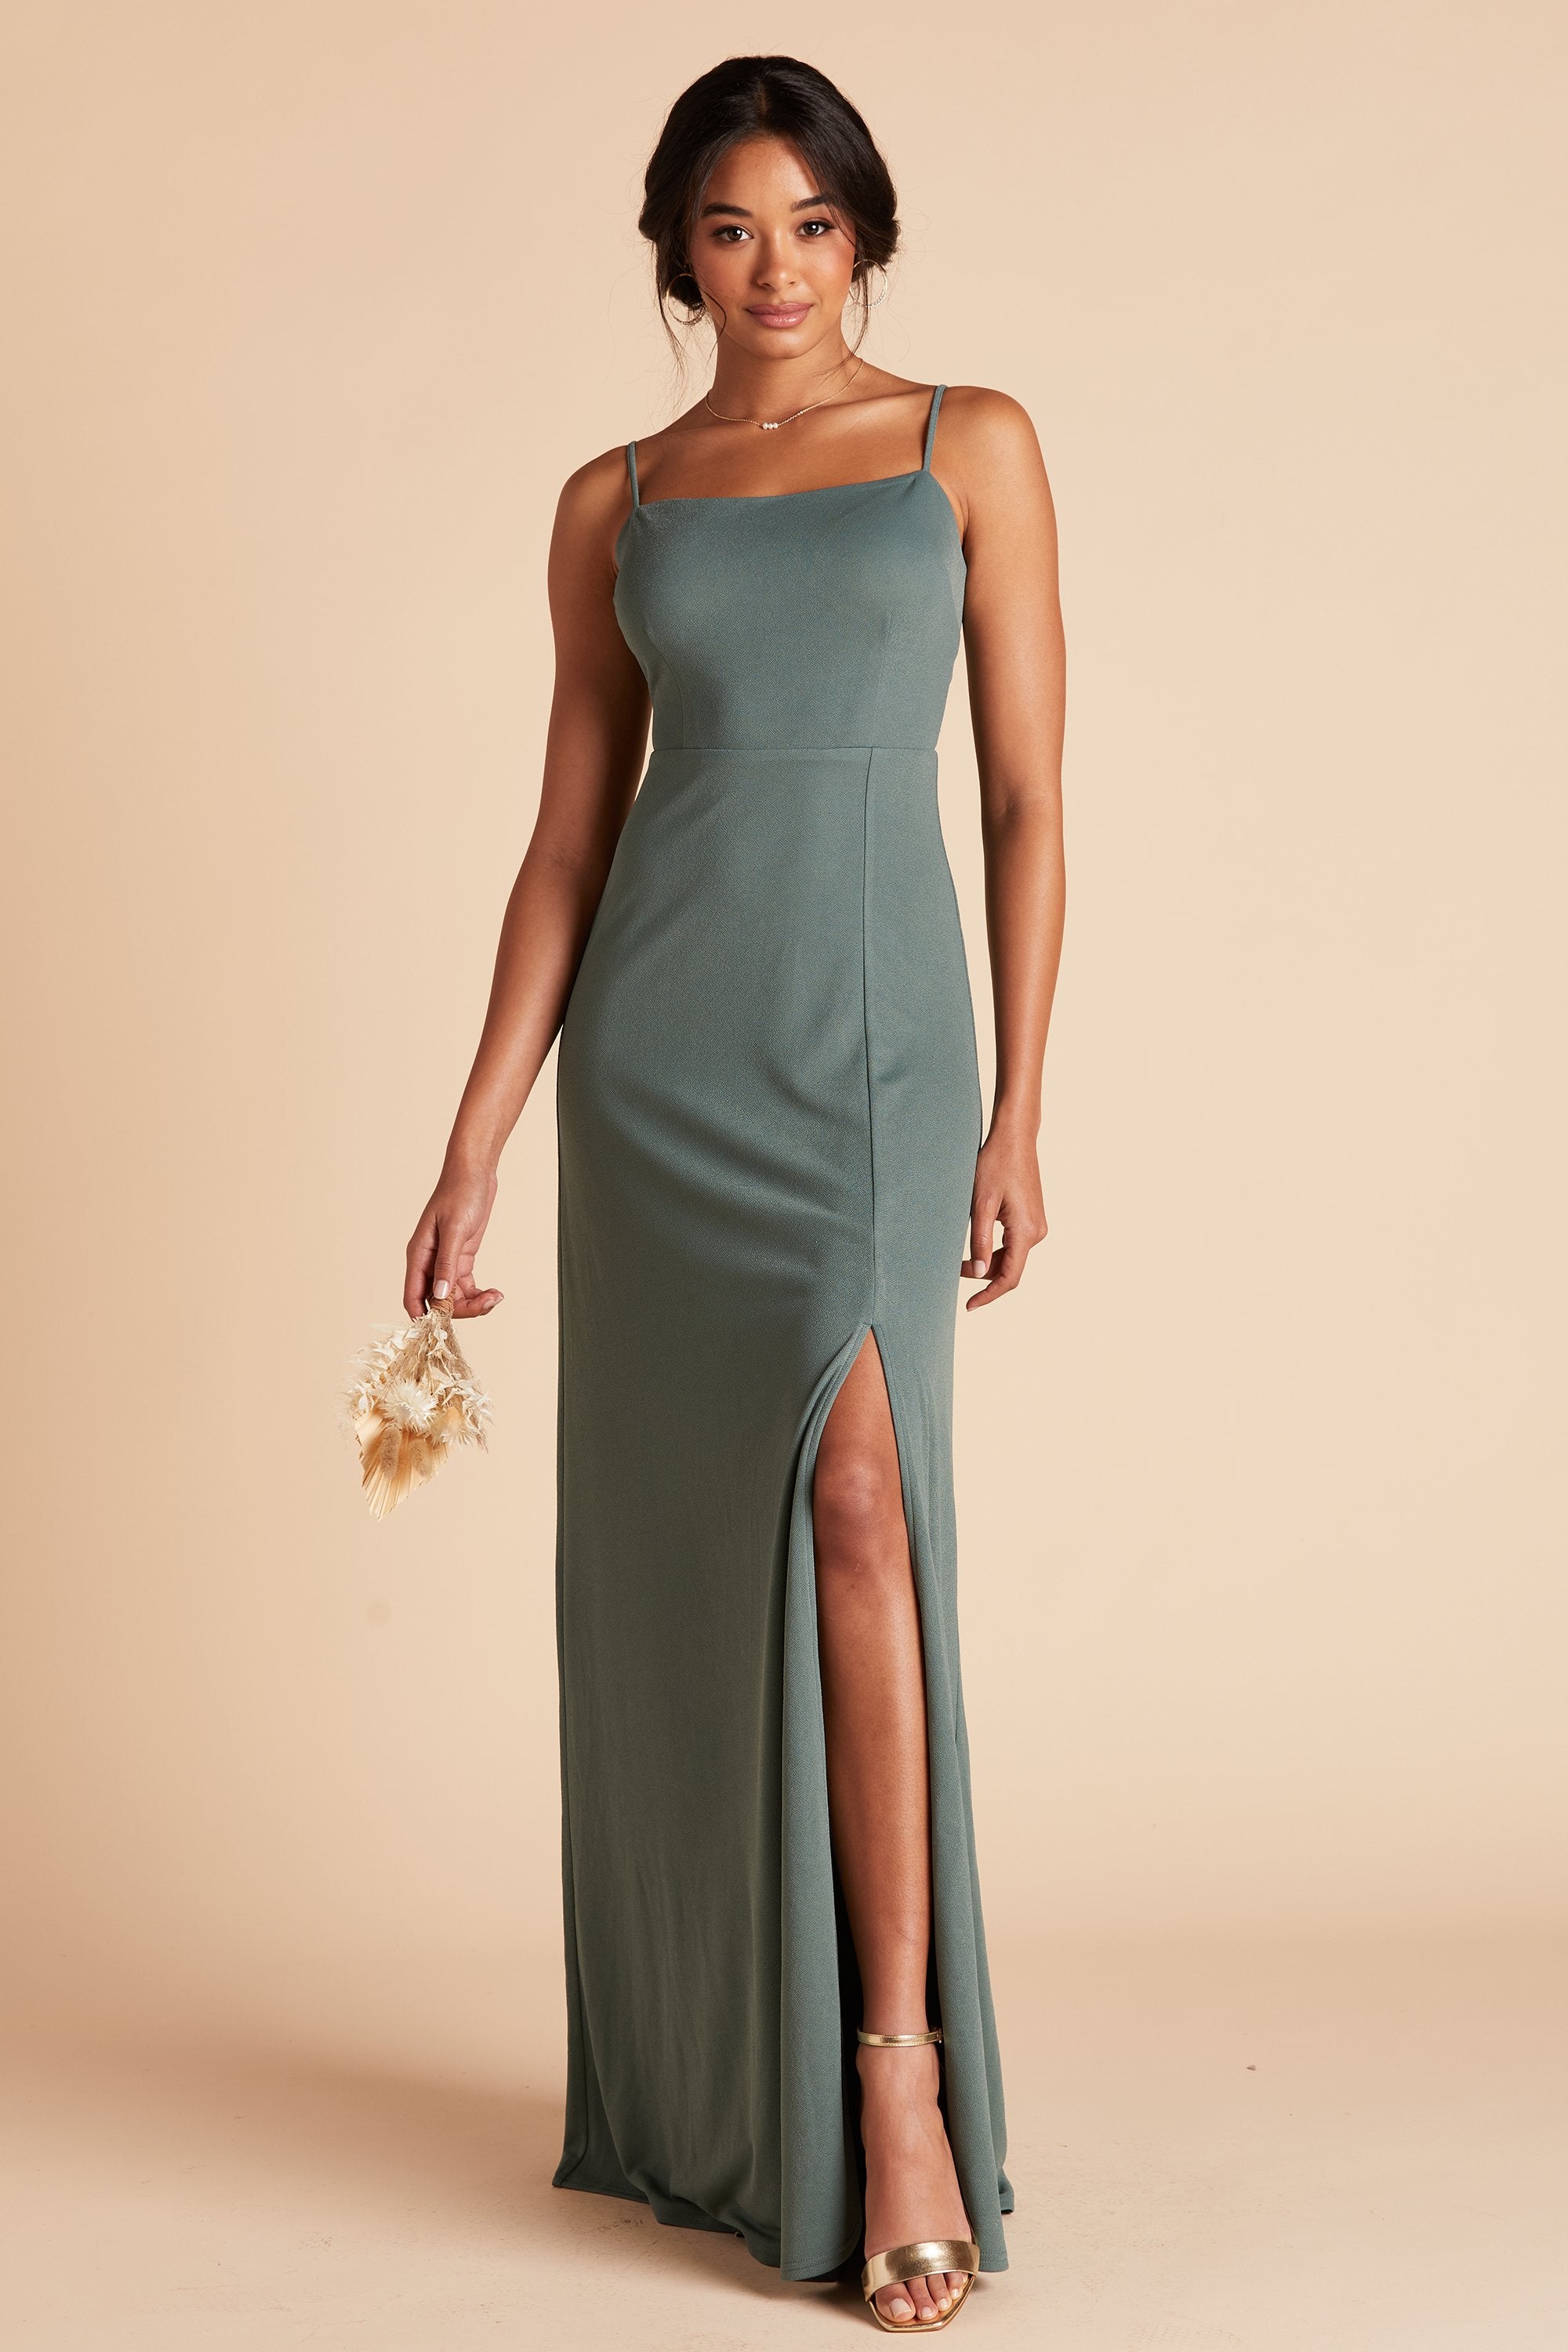 Benny bridesmaid dress in sea glass green crepe with slit by Birdy Grey, front view